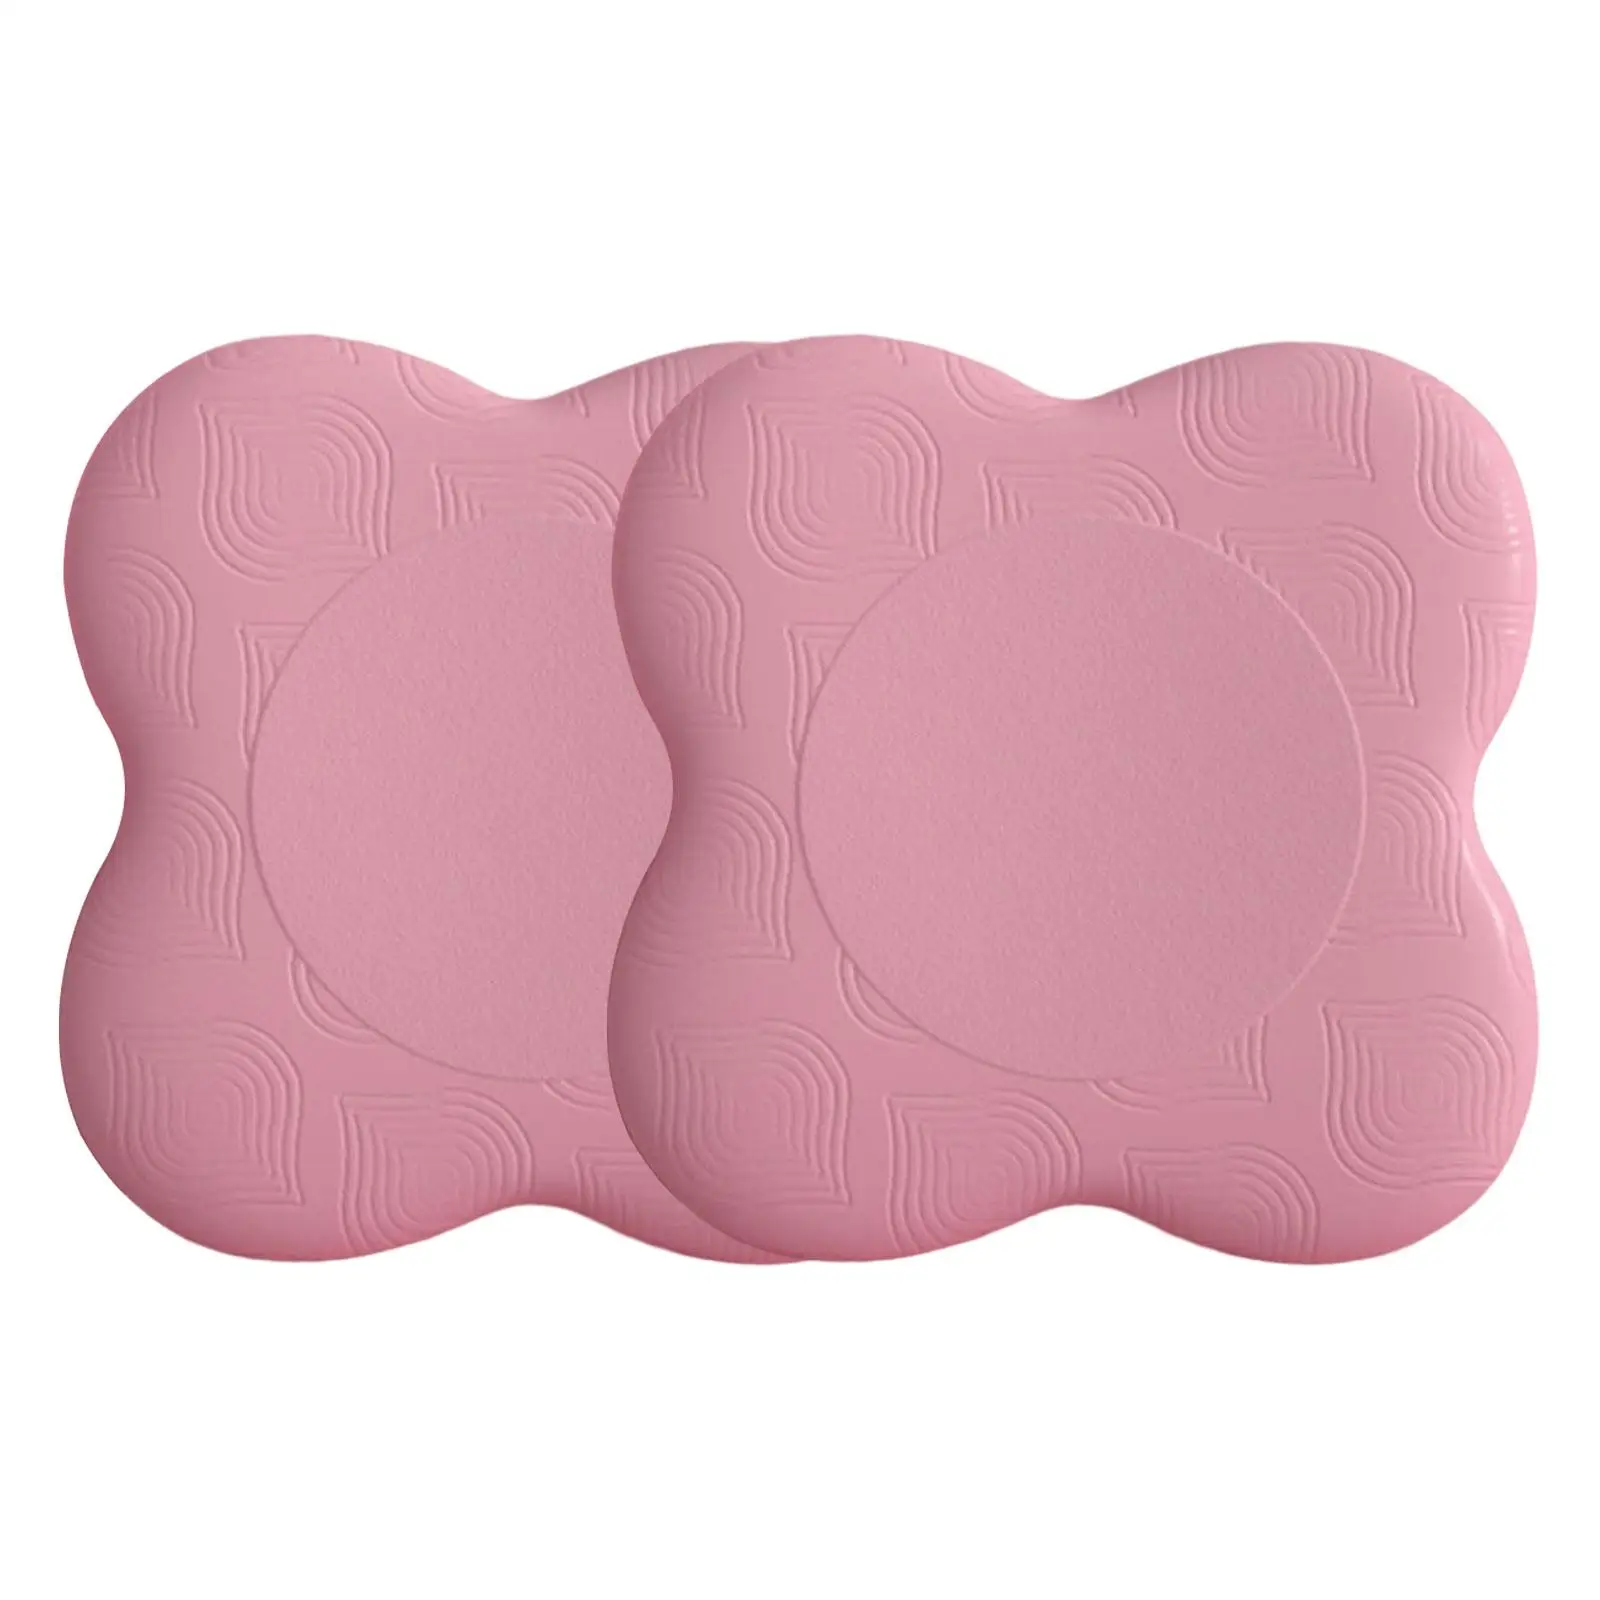 2Pcs Yoga Knee Pads Exercise Knee Pad Balance Cushion for Elbow Ankle Travel